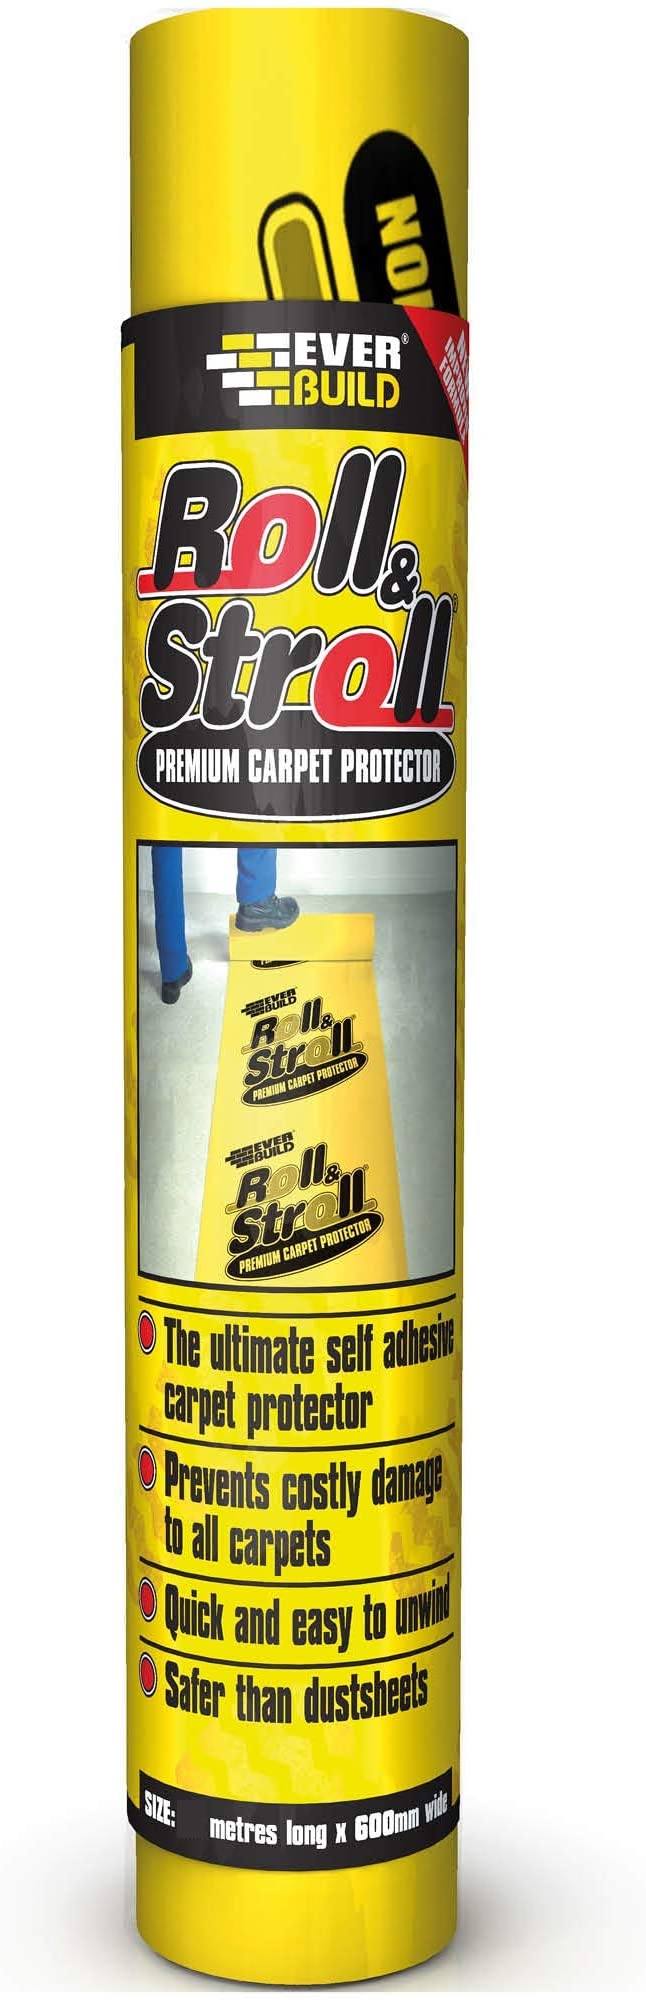 Roll & Stroll Premium Carpet Protector, Self Adhesive Floor Protection for Carpets, 25 m, Yellow